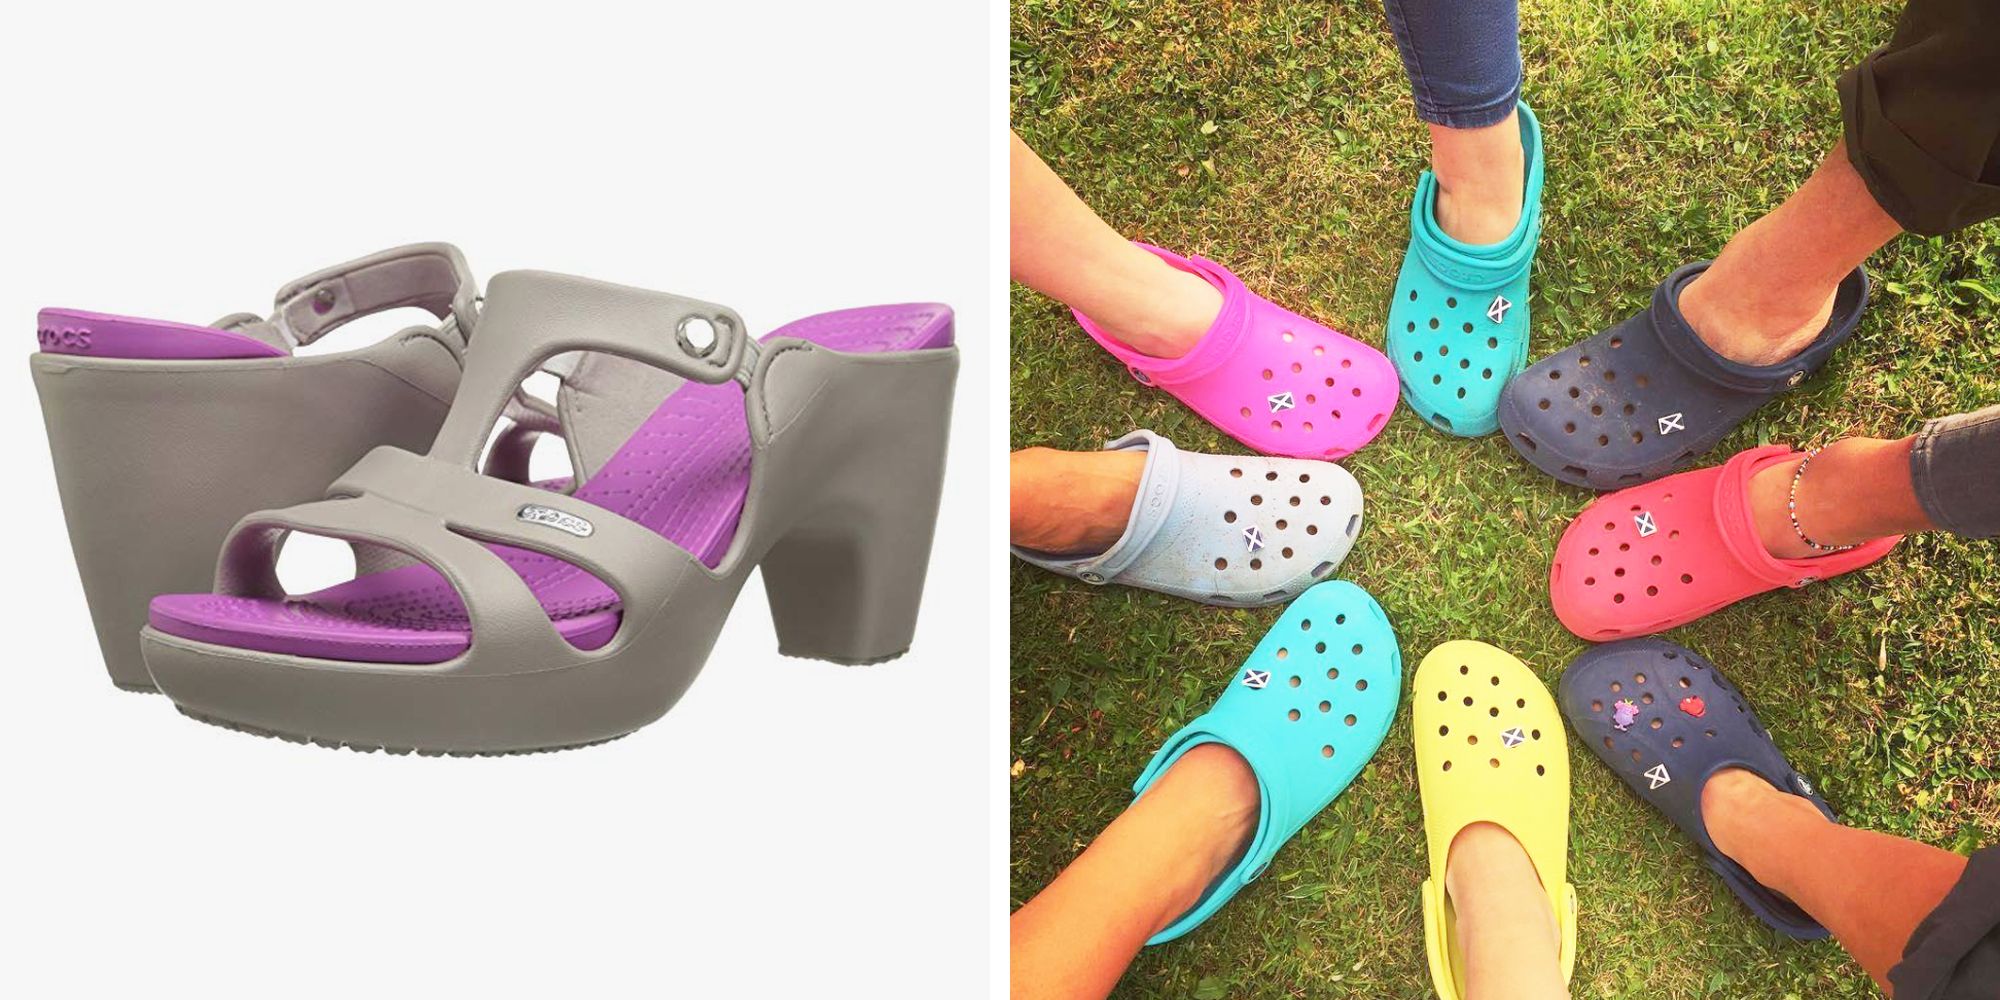 Making Croc High Heels | Some items of clothing should never see the light  of day... | By LADbible | Going to combine Crocs and Heels into one. I'm  all about fashion